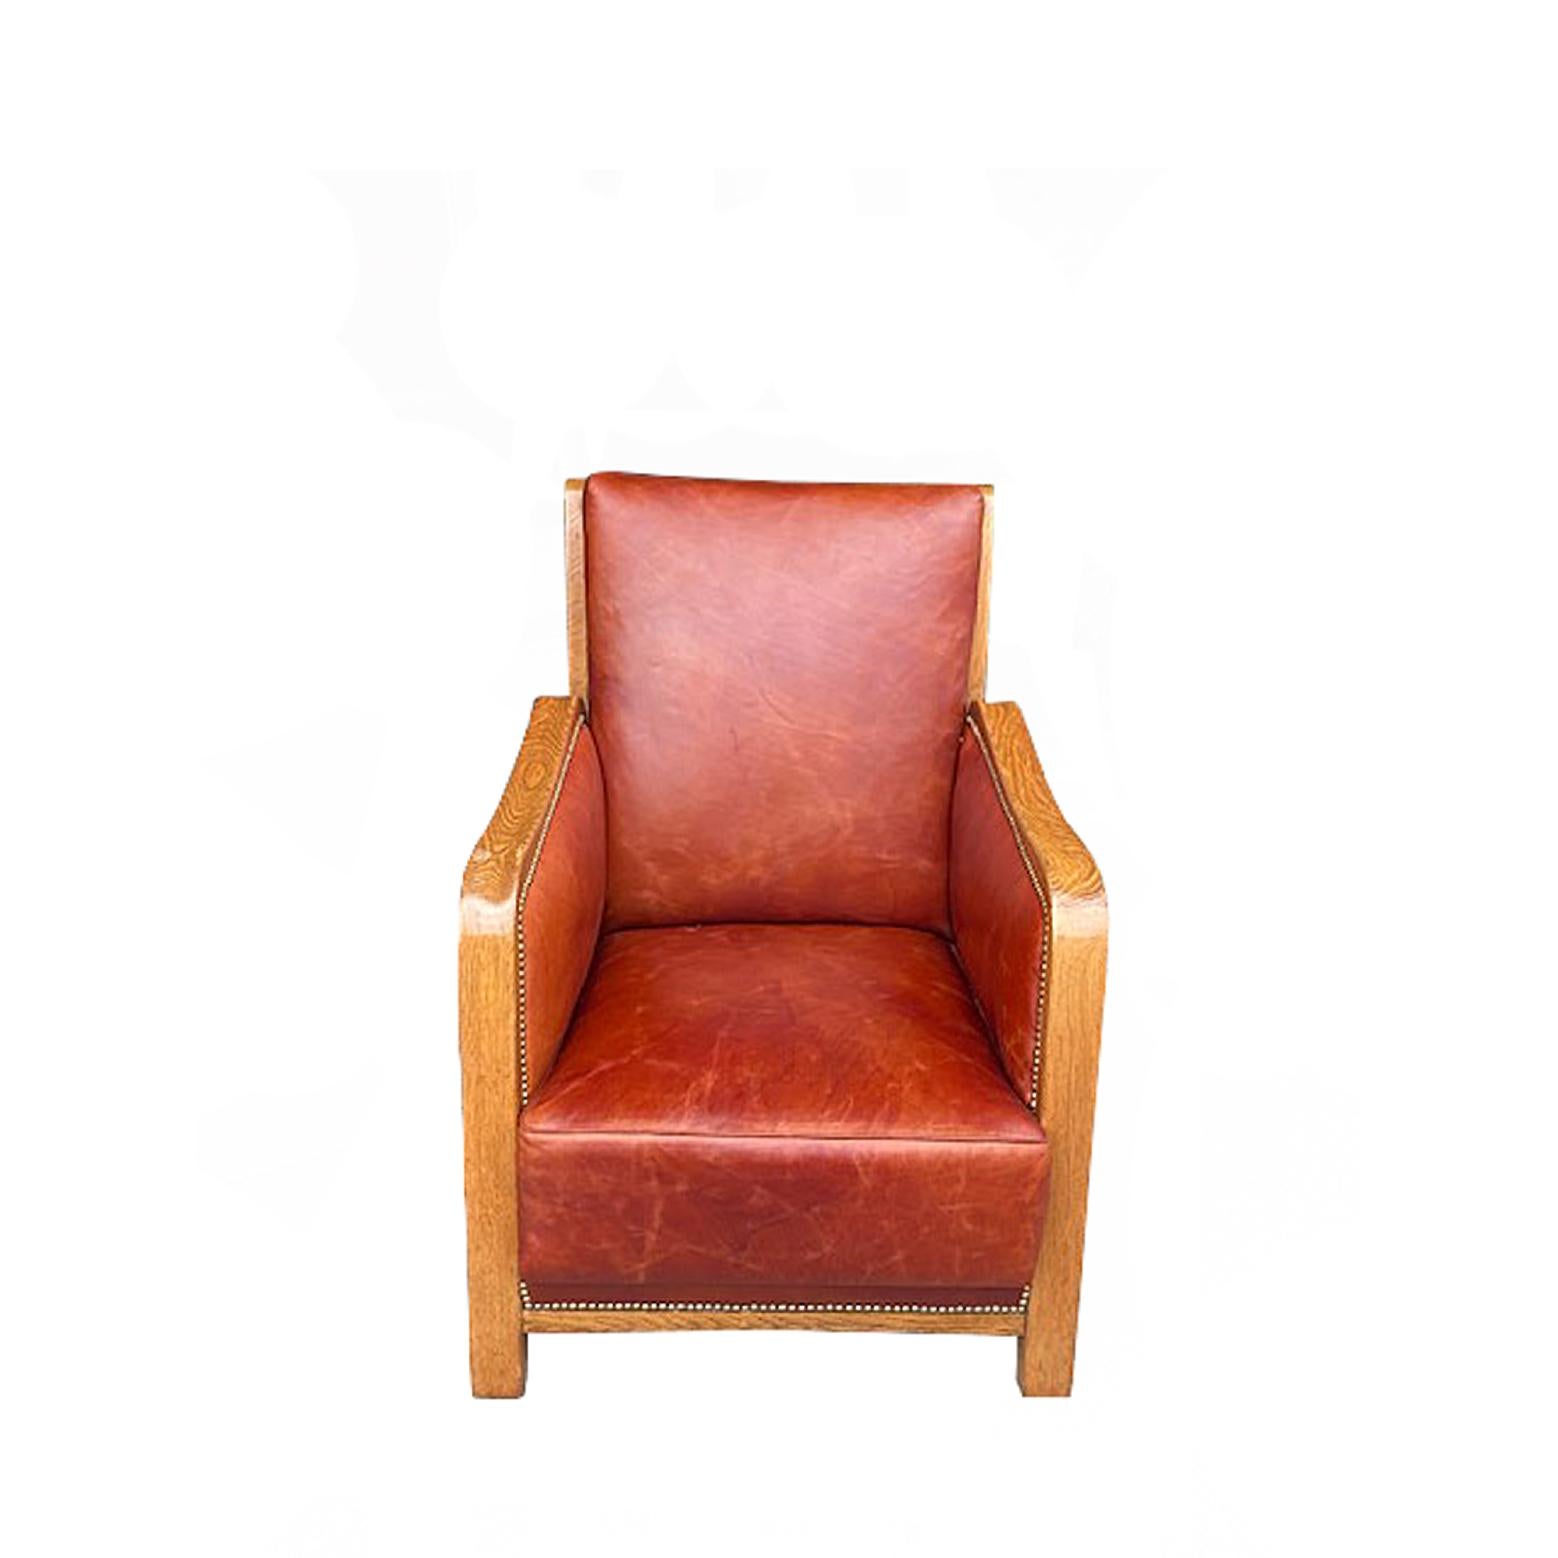 Mid-20th Century Rare Custom Chair by Frits Henningsen 1930's For Sale